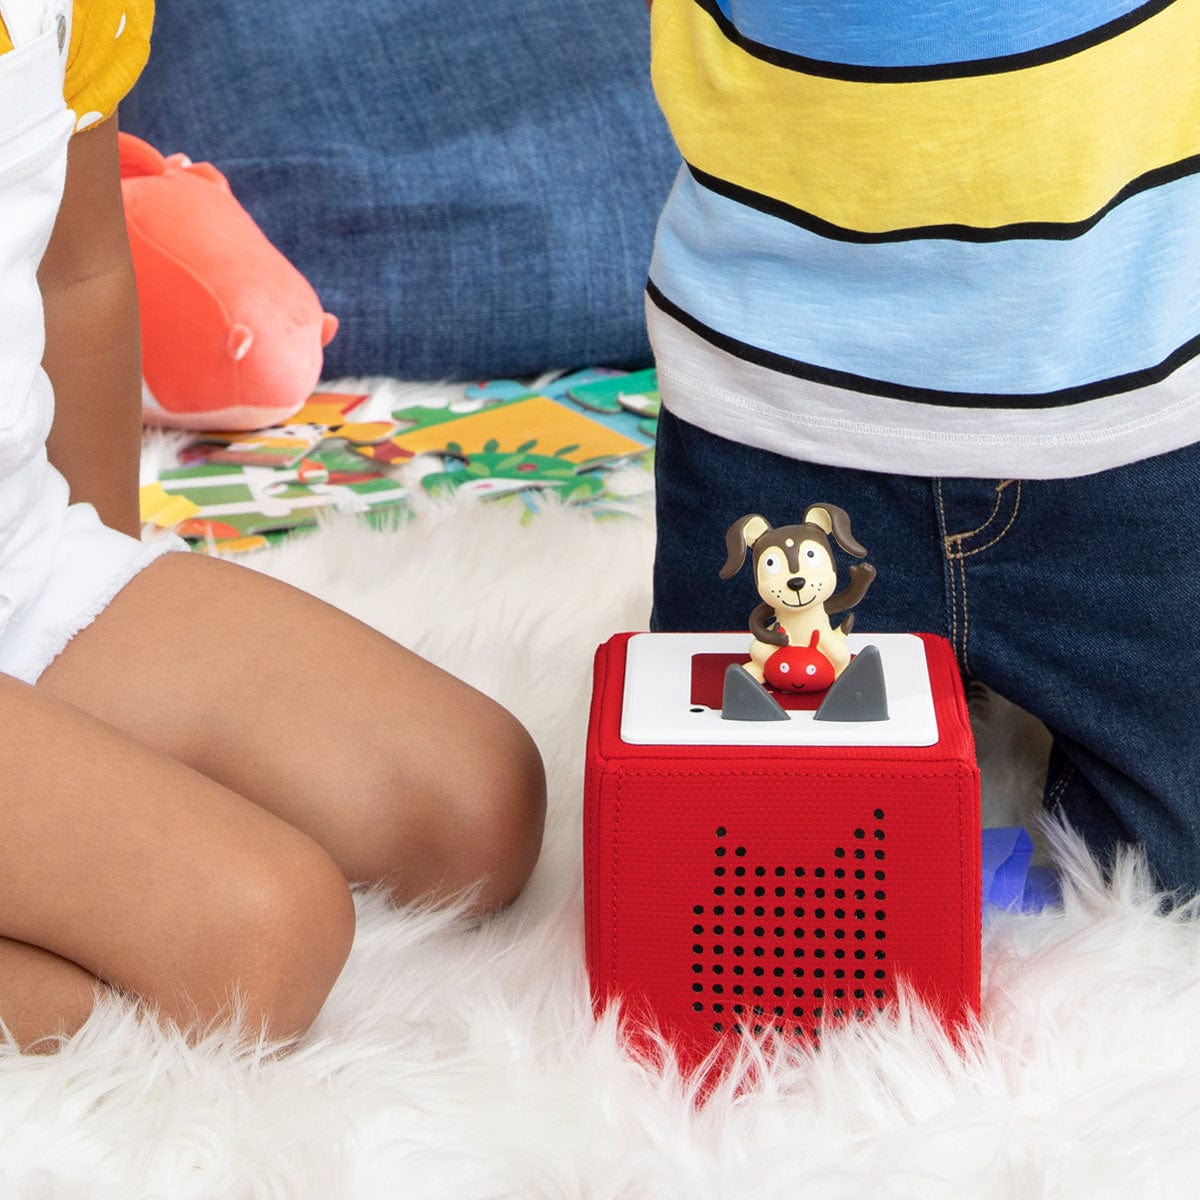 Tonies Box: The Ultimate Kids Music and Story Device — The  Montessori-Minded Mom